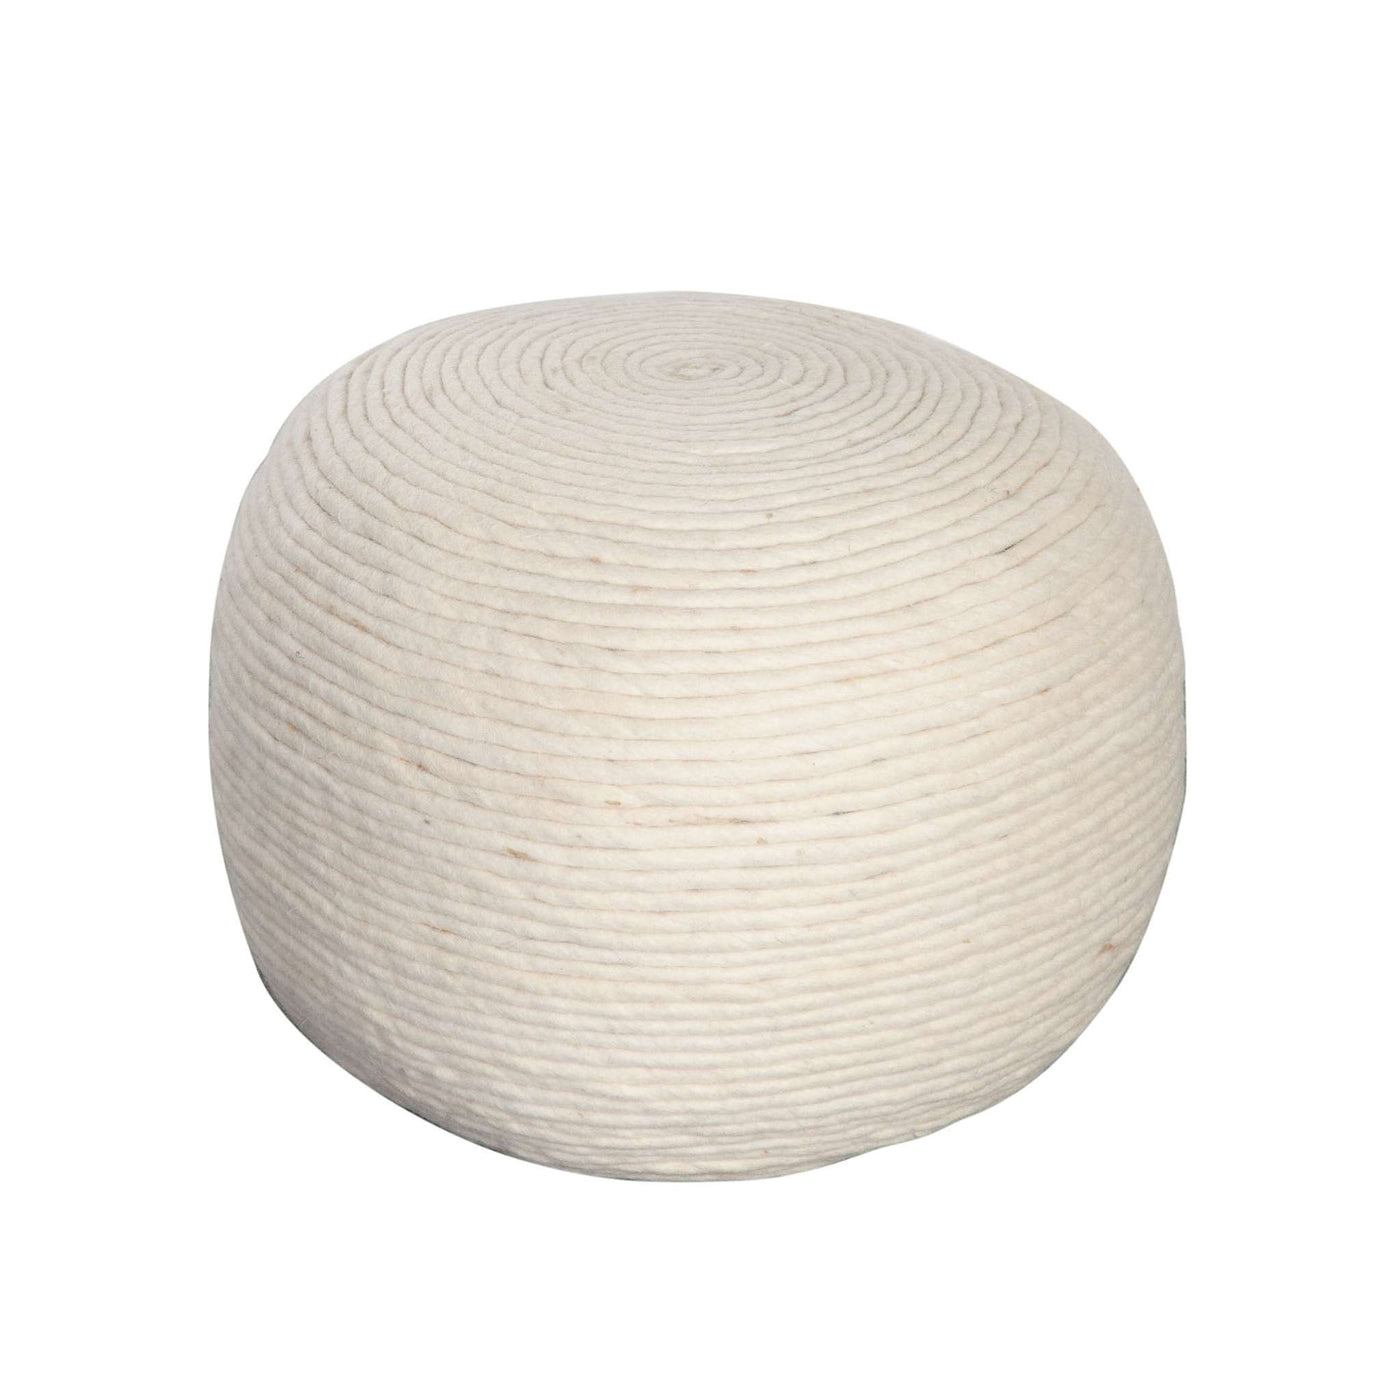 Round Accent Stool in Natural Jute Fiber w/ Wood Legs by Diamond Sofa